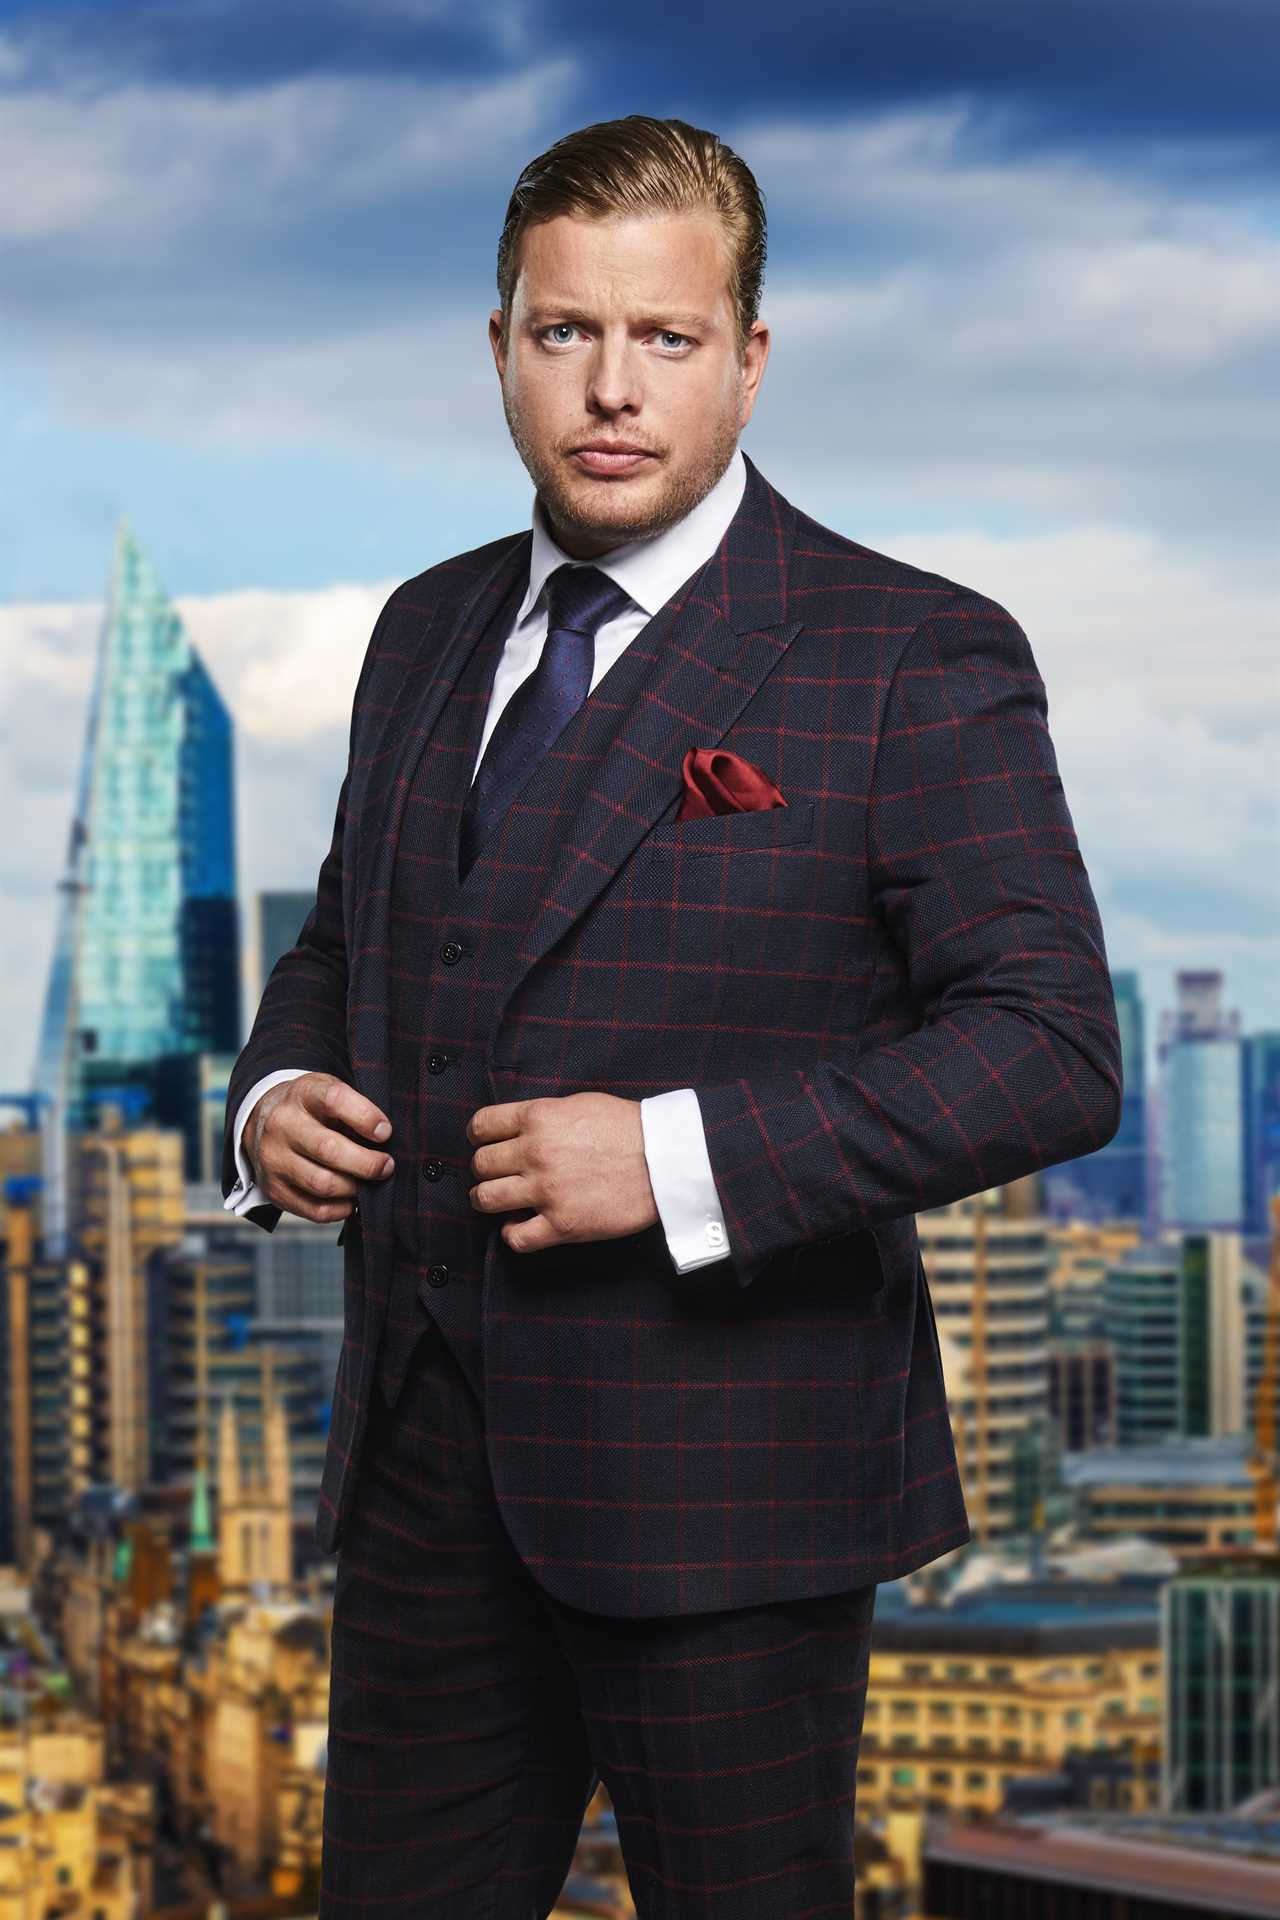 Apprentice star confirms he is expecting twins with his wife